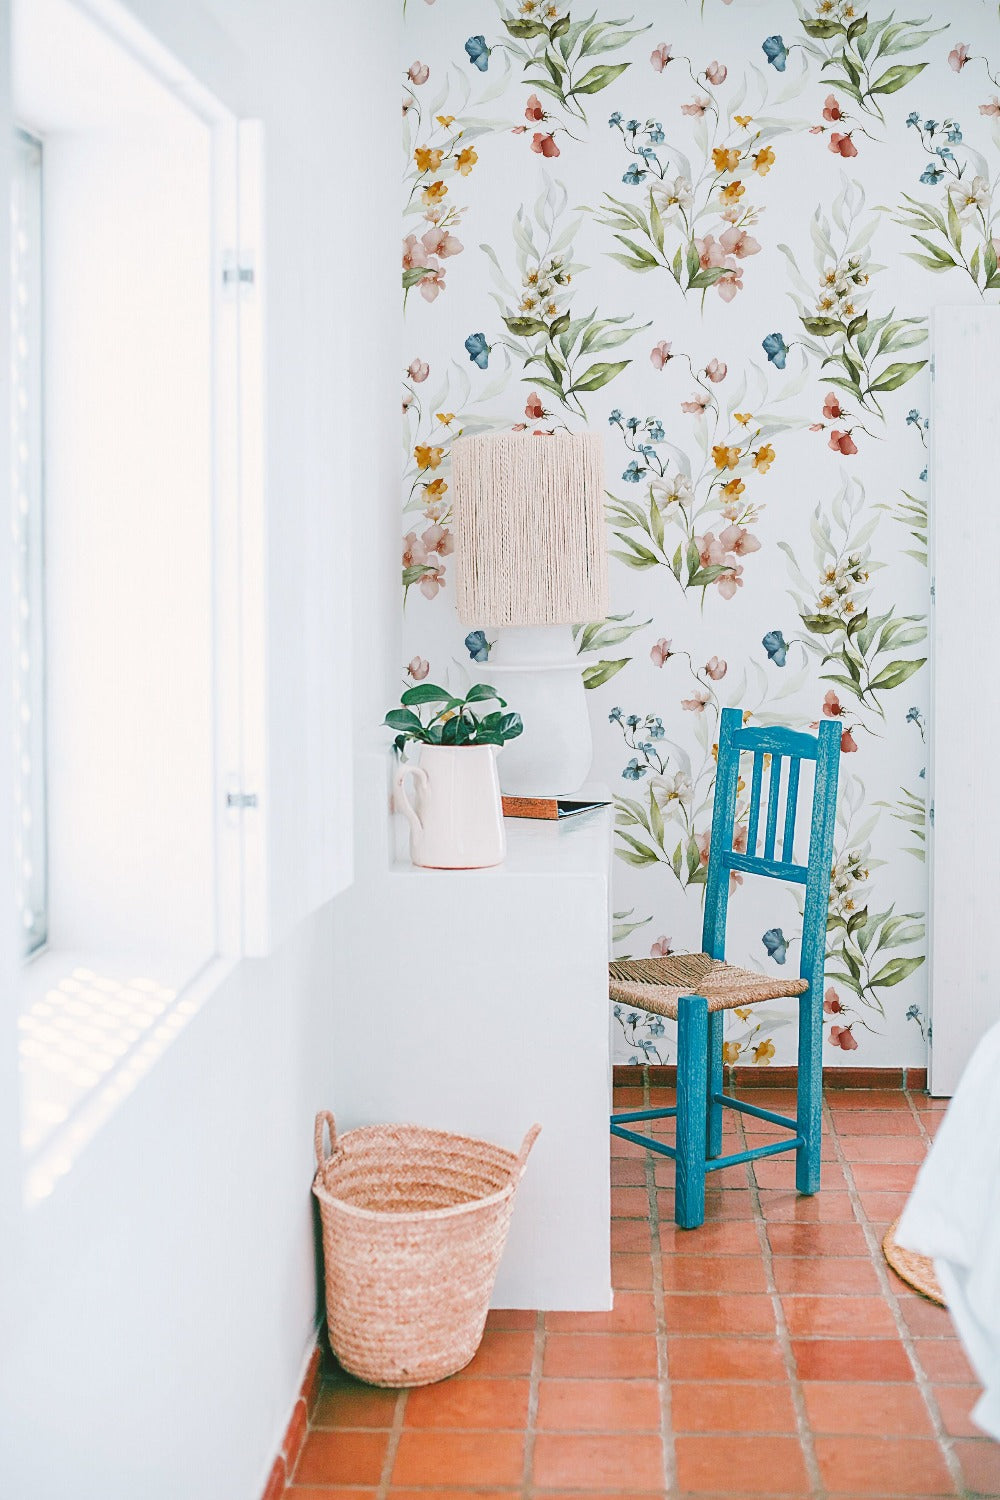 A bright and airy room with the Watercolour Bouquet Floral Wallpaper. The wallpaper has a soft floral design in pastel hues, enhancing the fresh and tranquil ambiance. The space includes a white desk with a plant and a decorative lamp, and a blue chair, adding a pop of color against the floral backdrop.